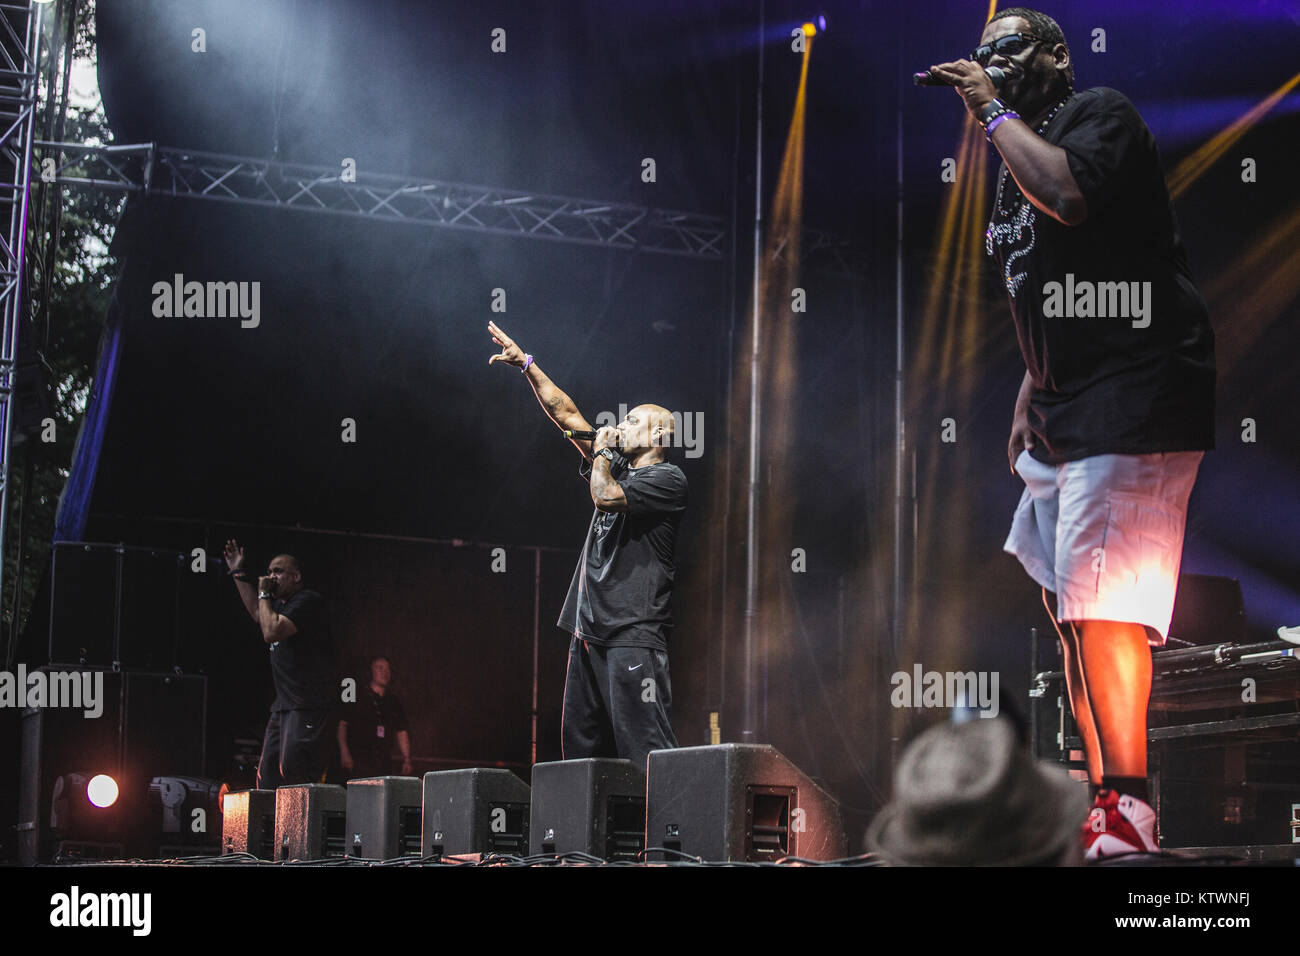 The American hip hop and rap group The Sugarhill Gang performs a live concert at the Danish music festival Vanguard Music Festival 2015 in Copenhagen. Denmark, 01/08 2015. Stock Photo